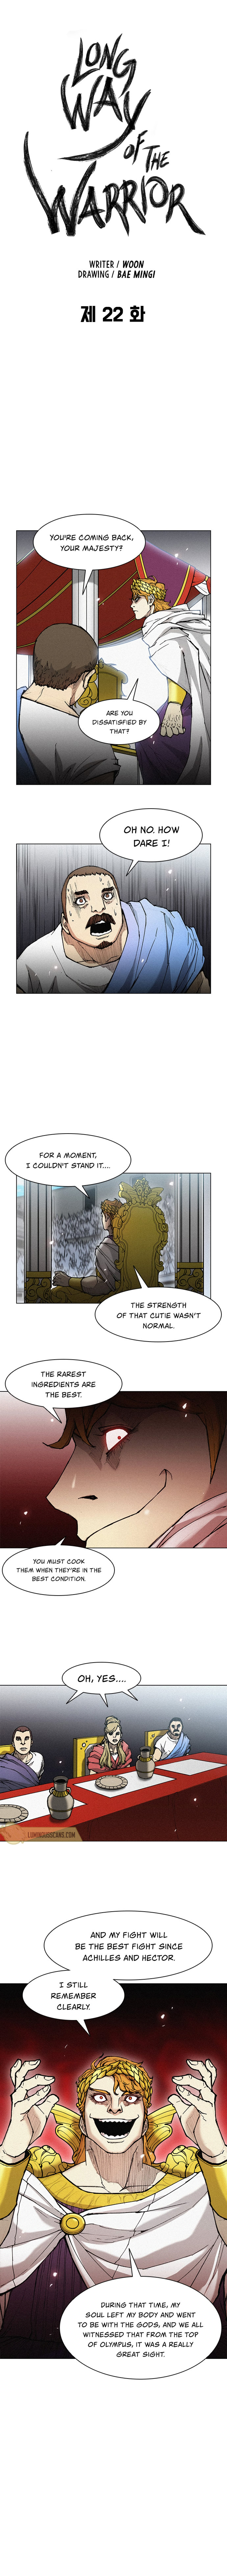 Long Way of the Warrior - Chapter 22 Page 3